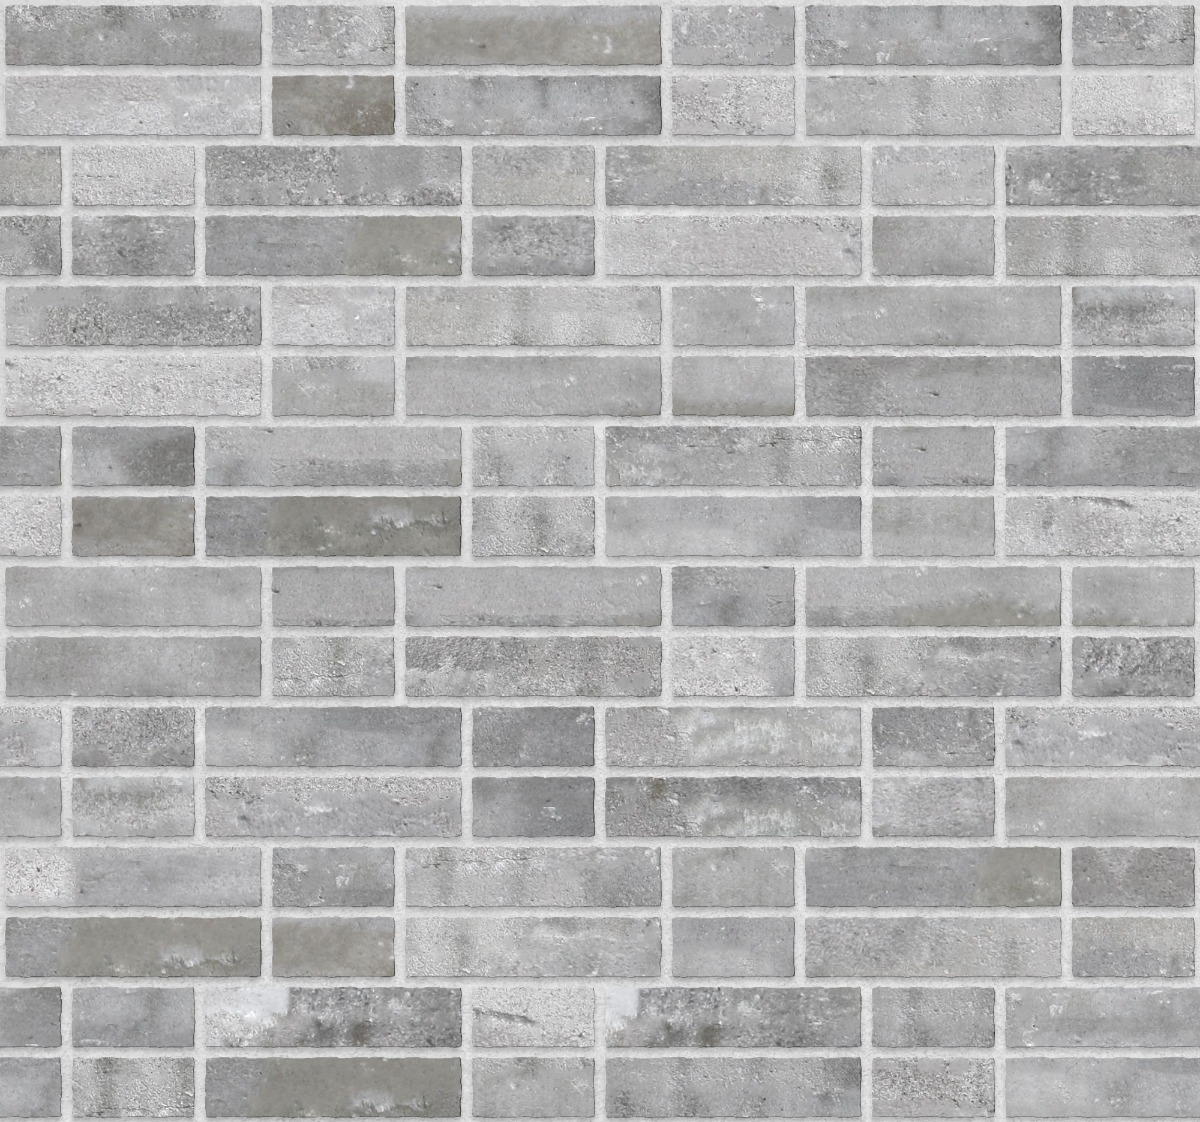 A seamless brick texture with finnish grey brick units arranged in a Double Flemish pattern